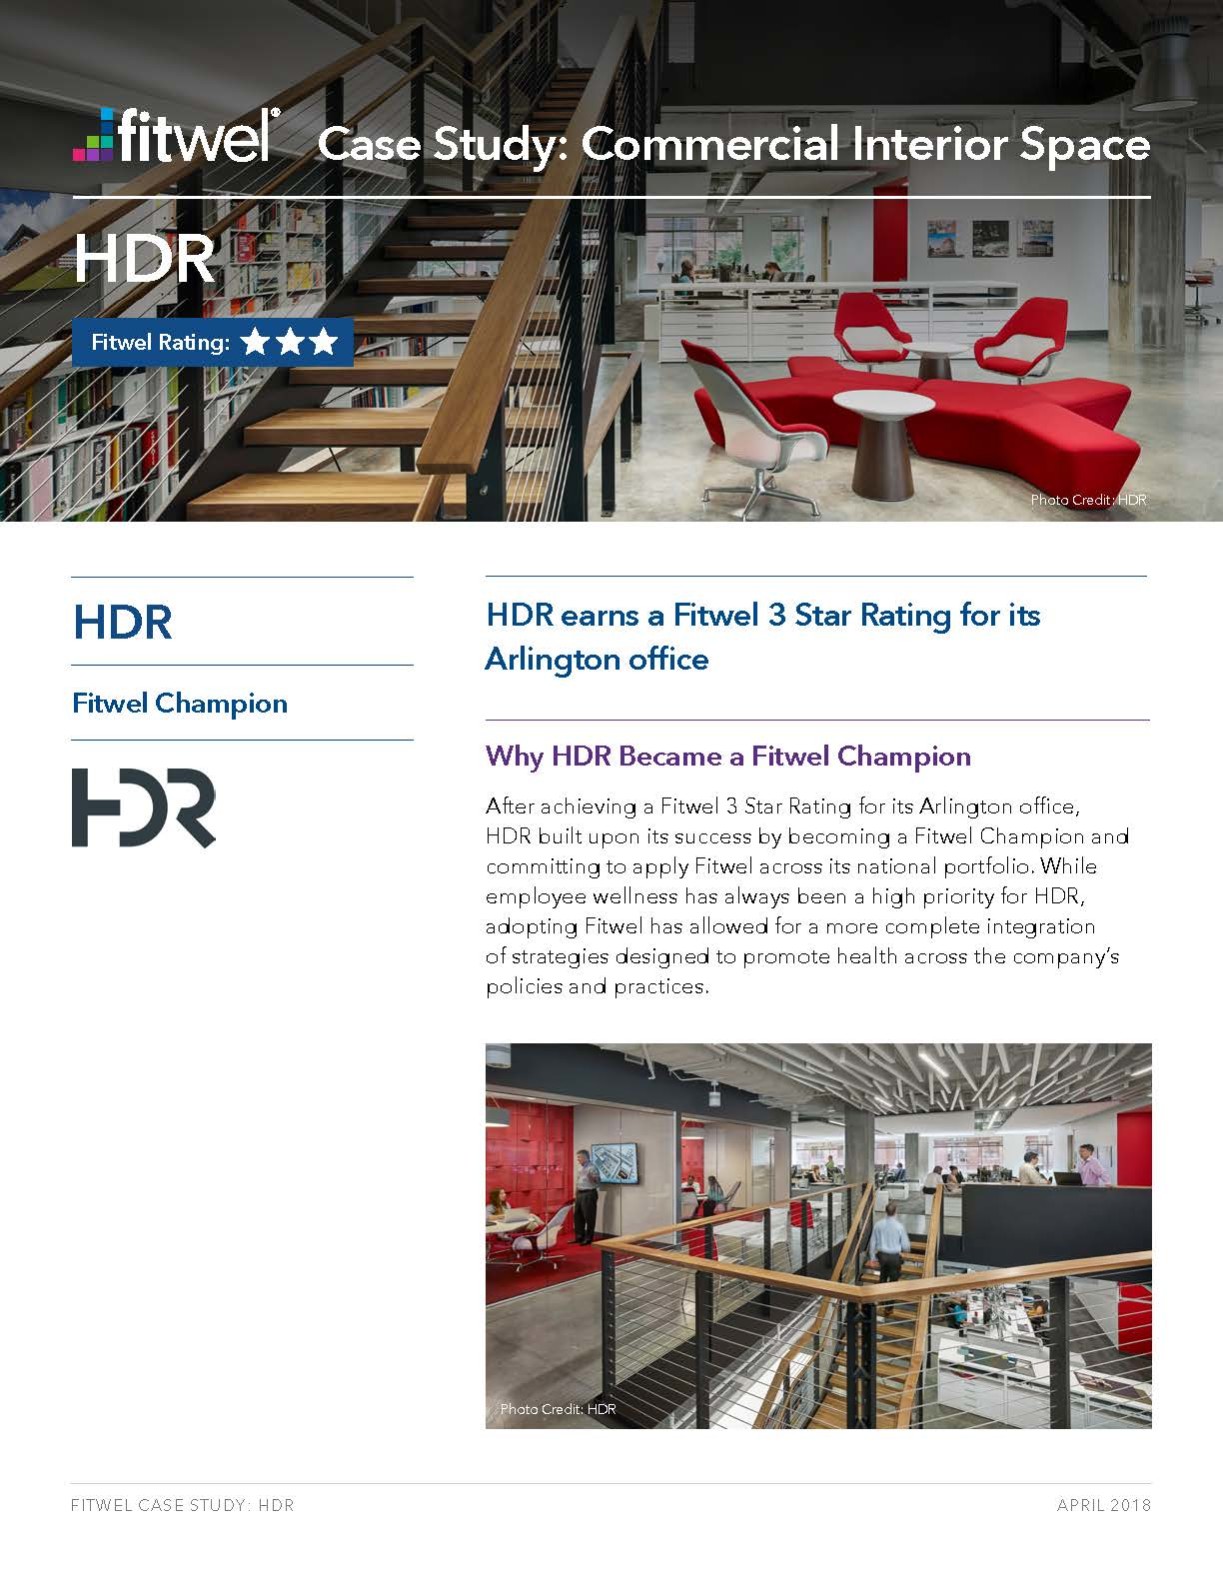 Fitwel Case Study: Commercial Interior Space – HDRFeatured Image